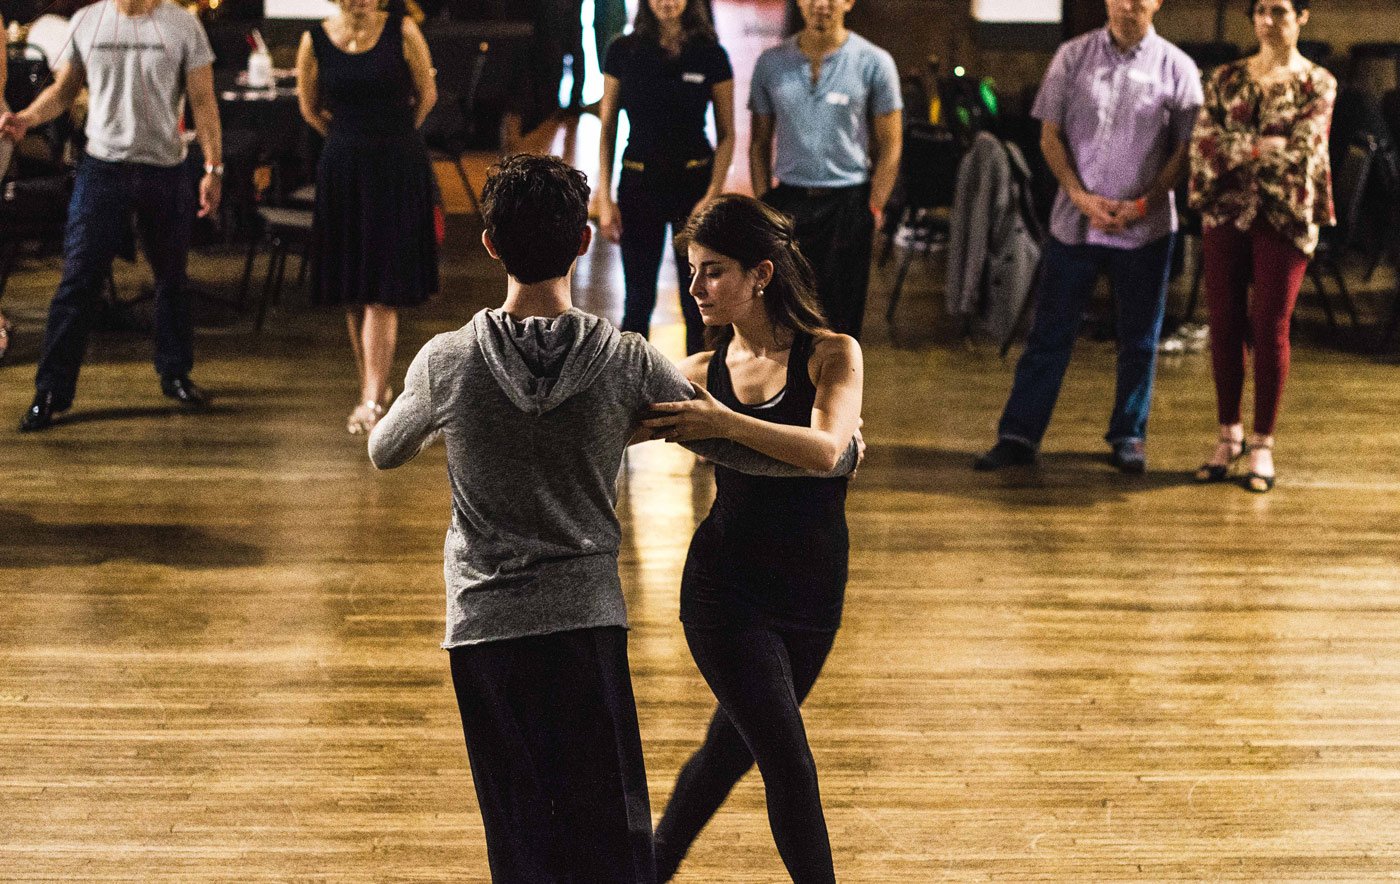 2018 SoCal Tango Competition Guide: PART 2 – How to Learn From Your Tango Teacher